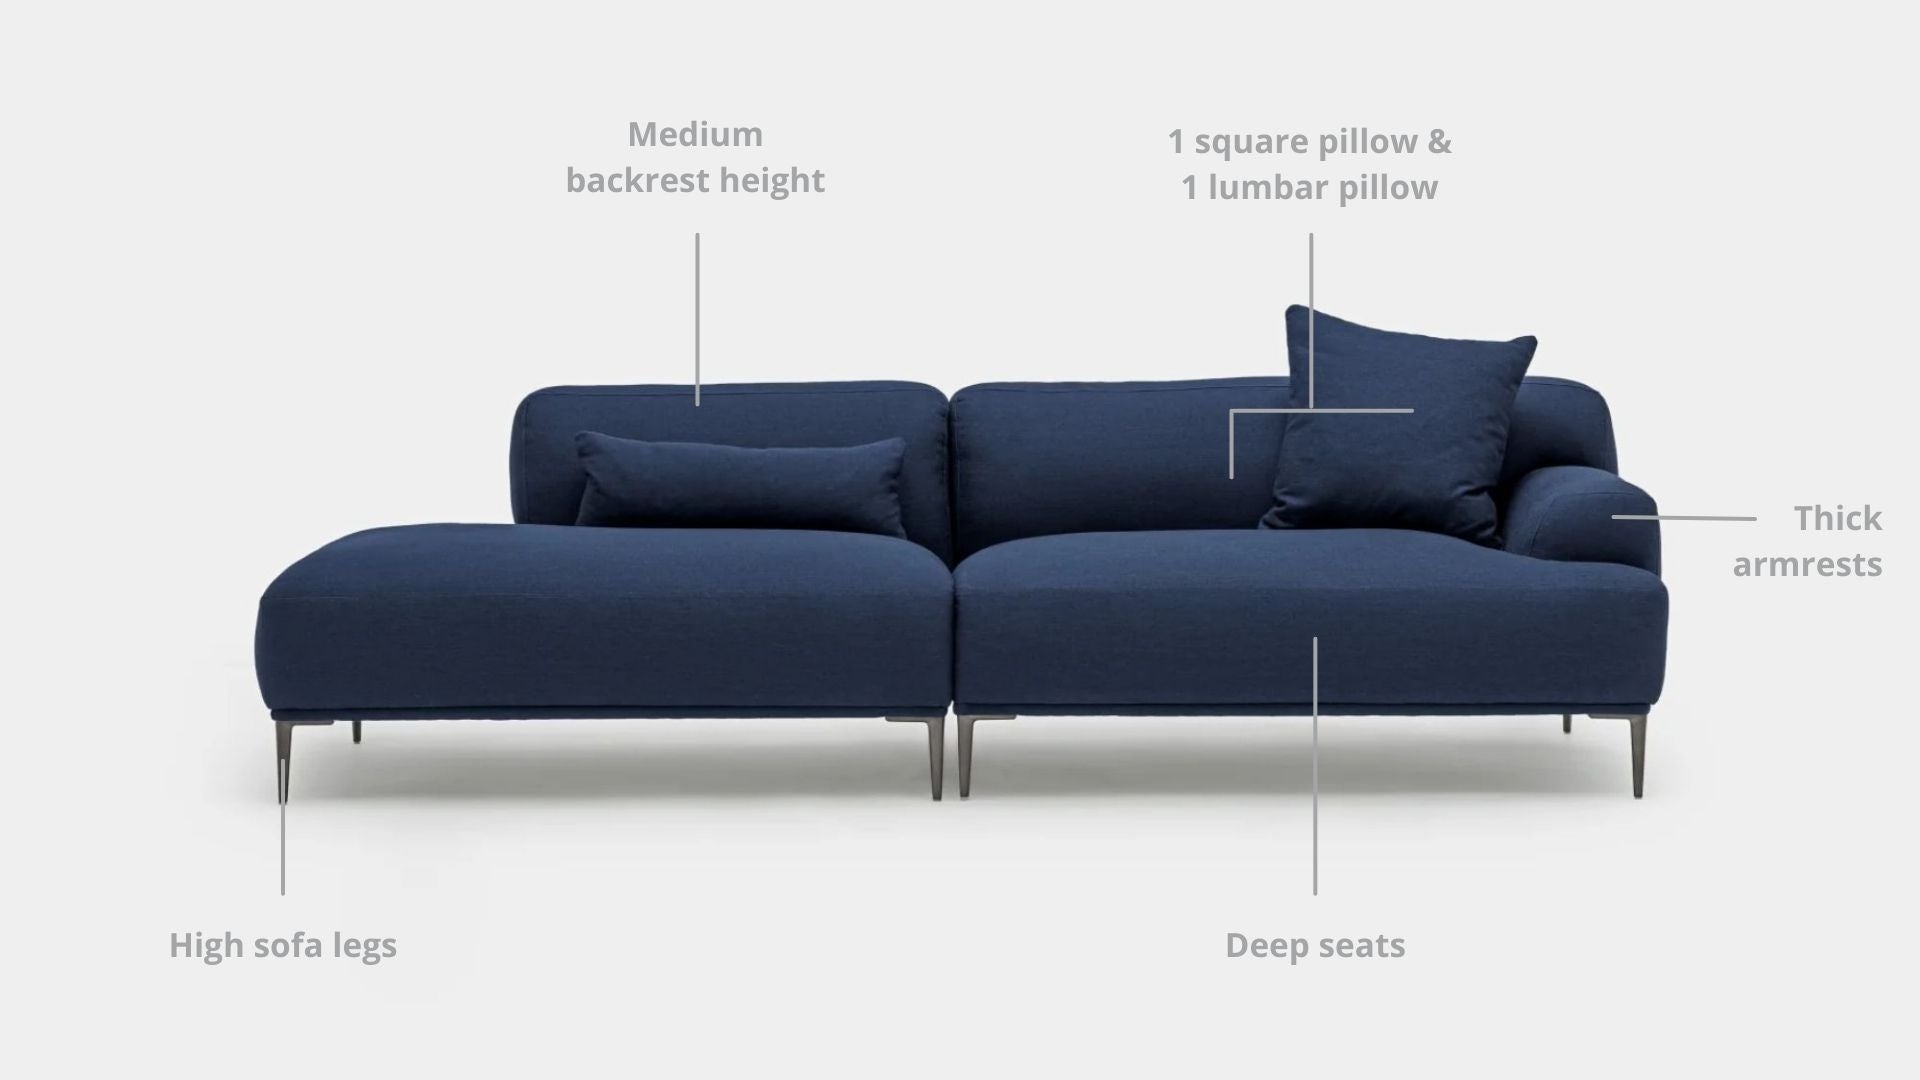 Key features such as armrest thickness, cushion height, seat depth and sofa leg height for Crystal Fabric One Arm Sofa